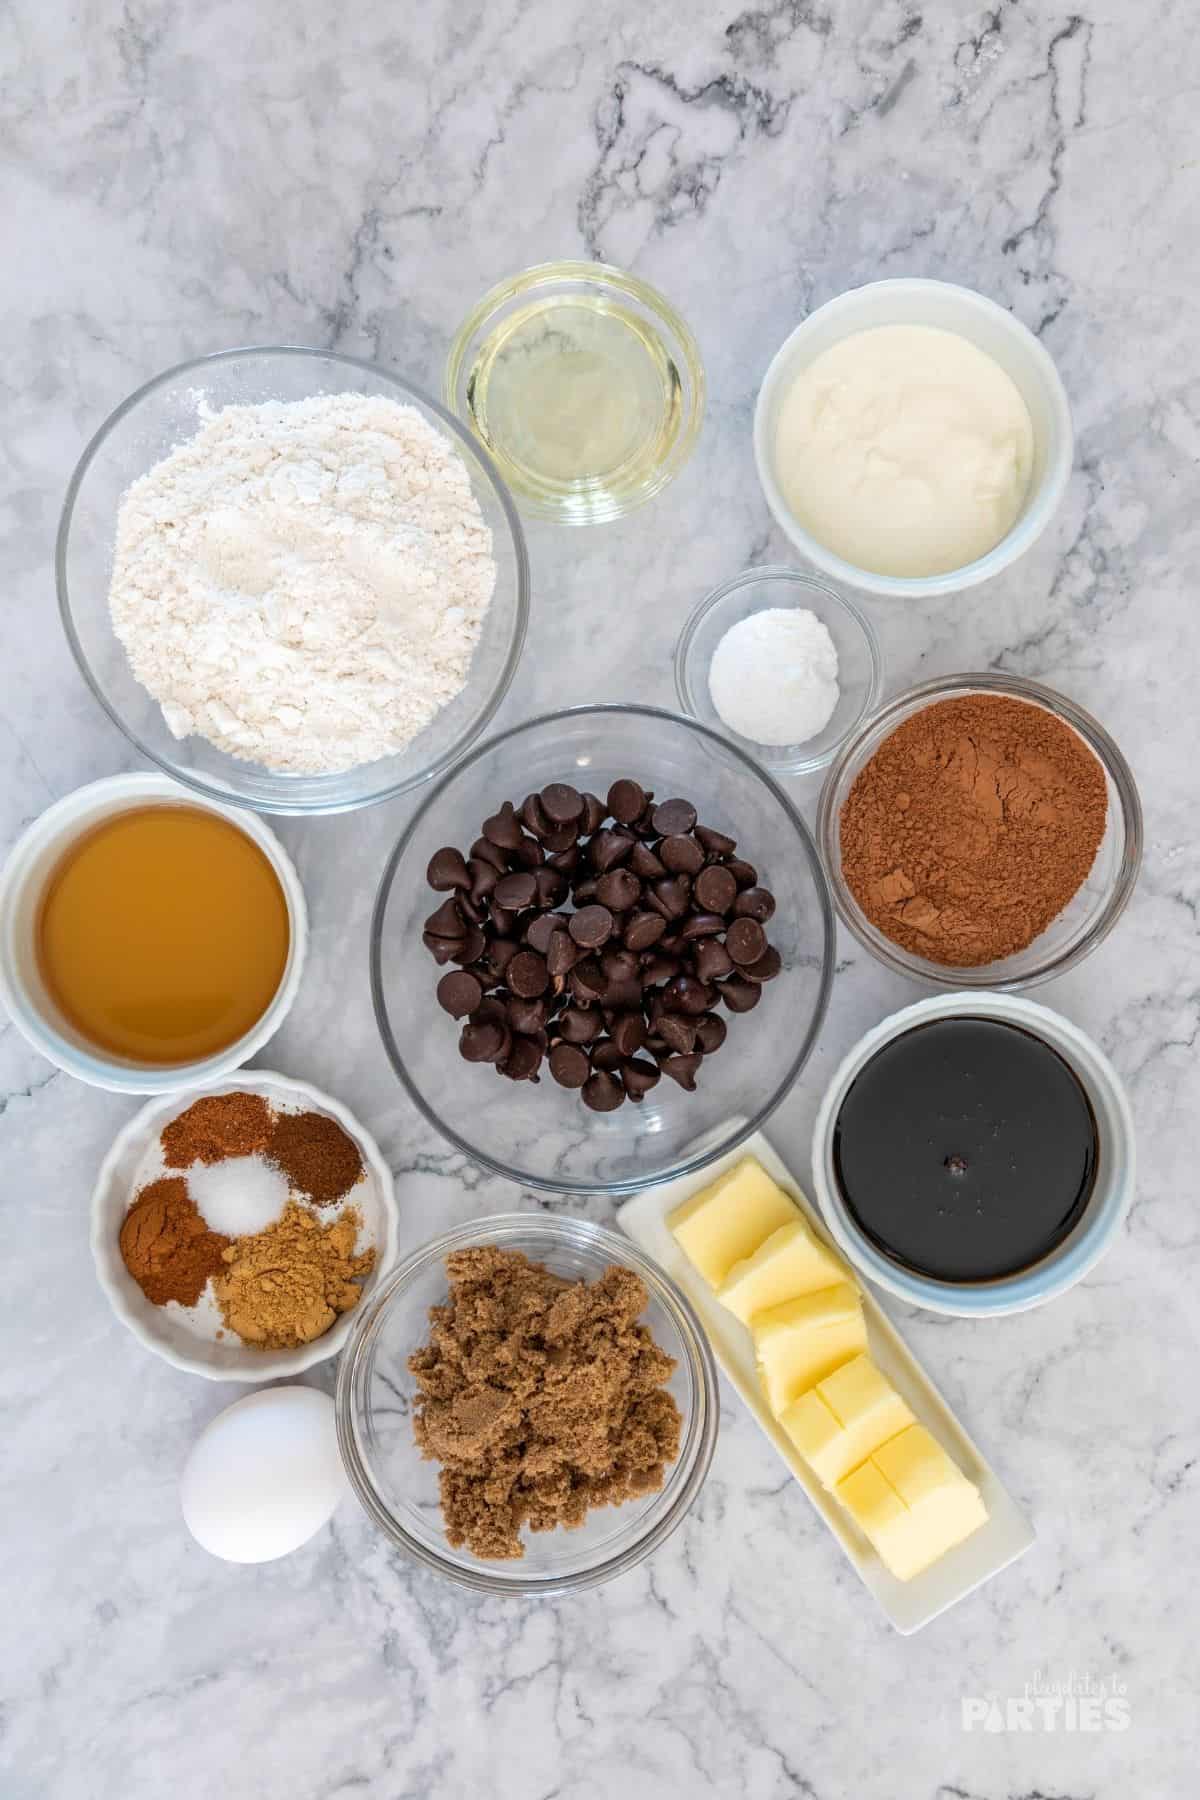 Ingredients for Gingerbread Bars with Chocolate and Rum.